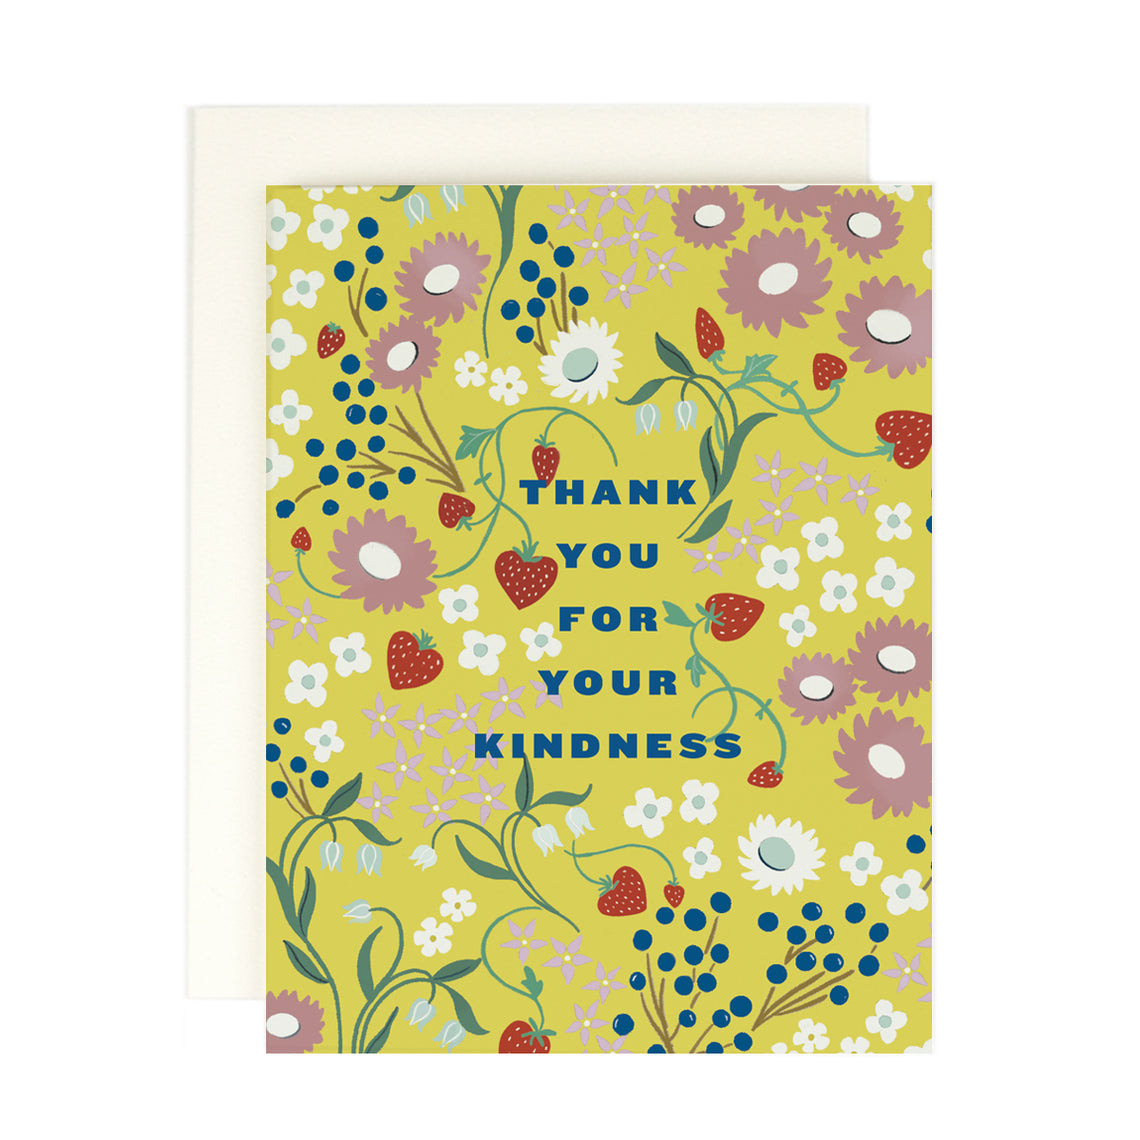 For Your Kindness